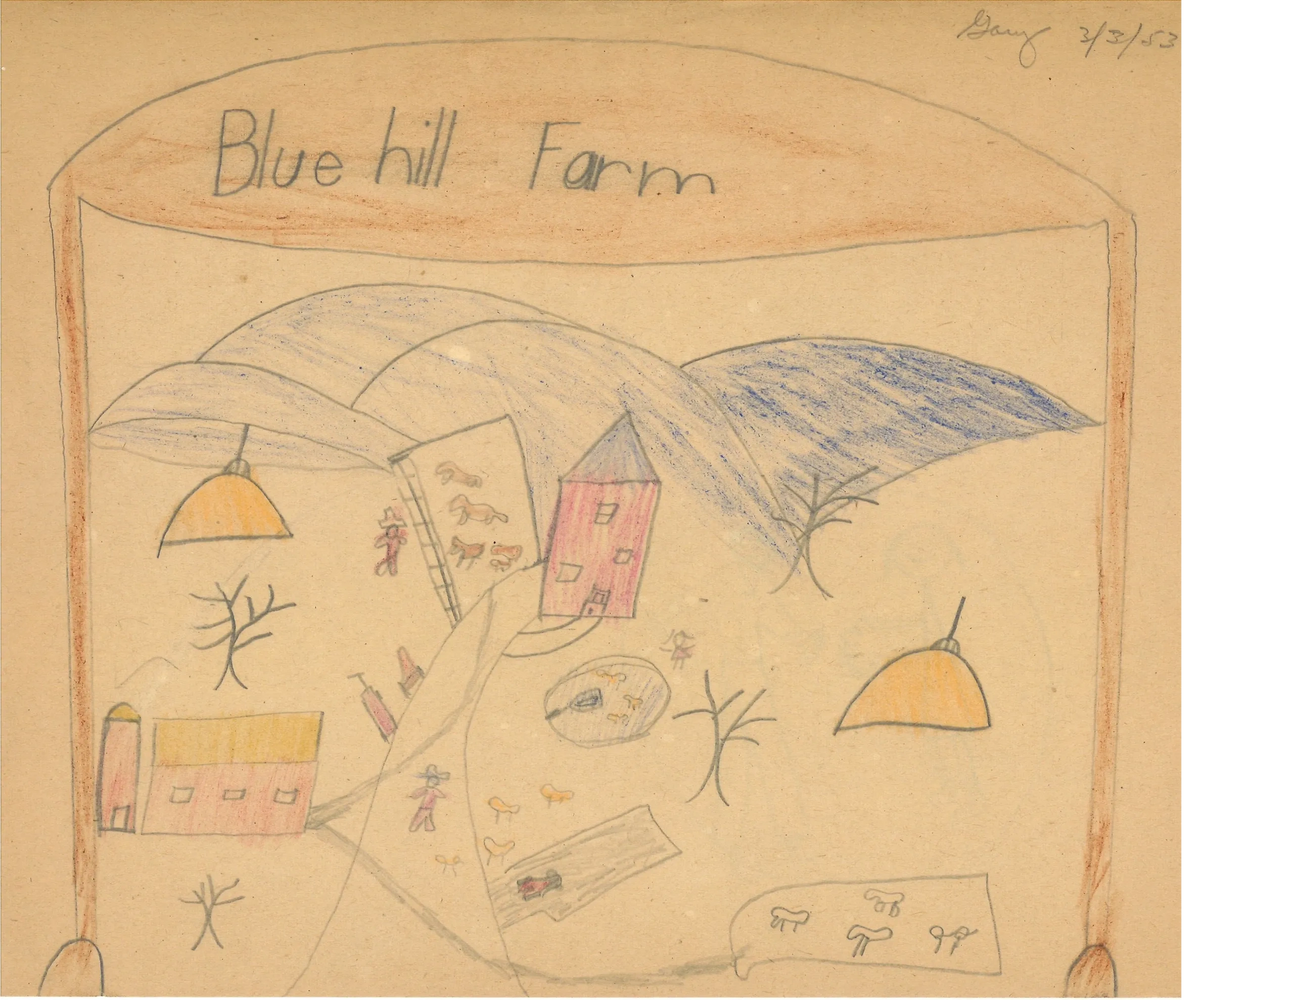 It was 1953 when my father drew a picture of Blue Hill Farm, he was 6 yrs old. Today he owns his own